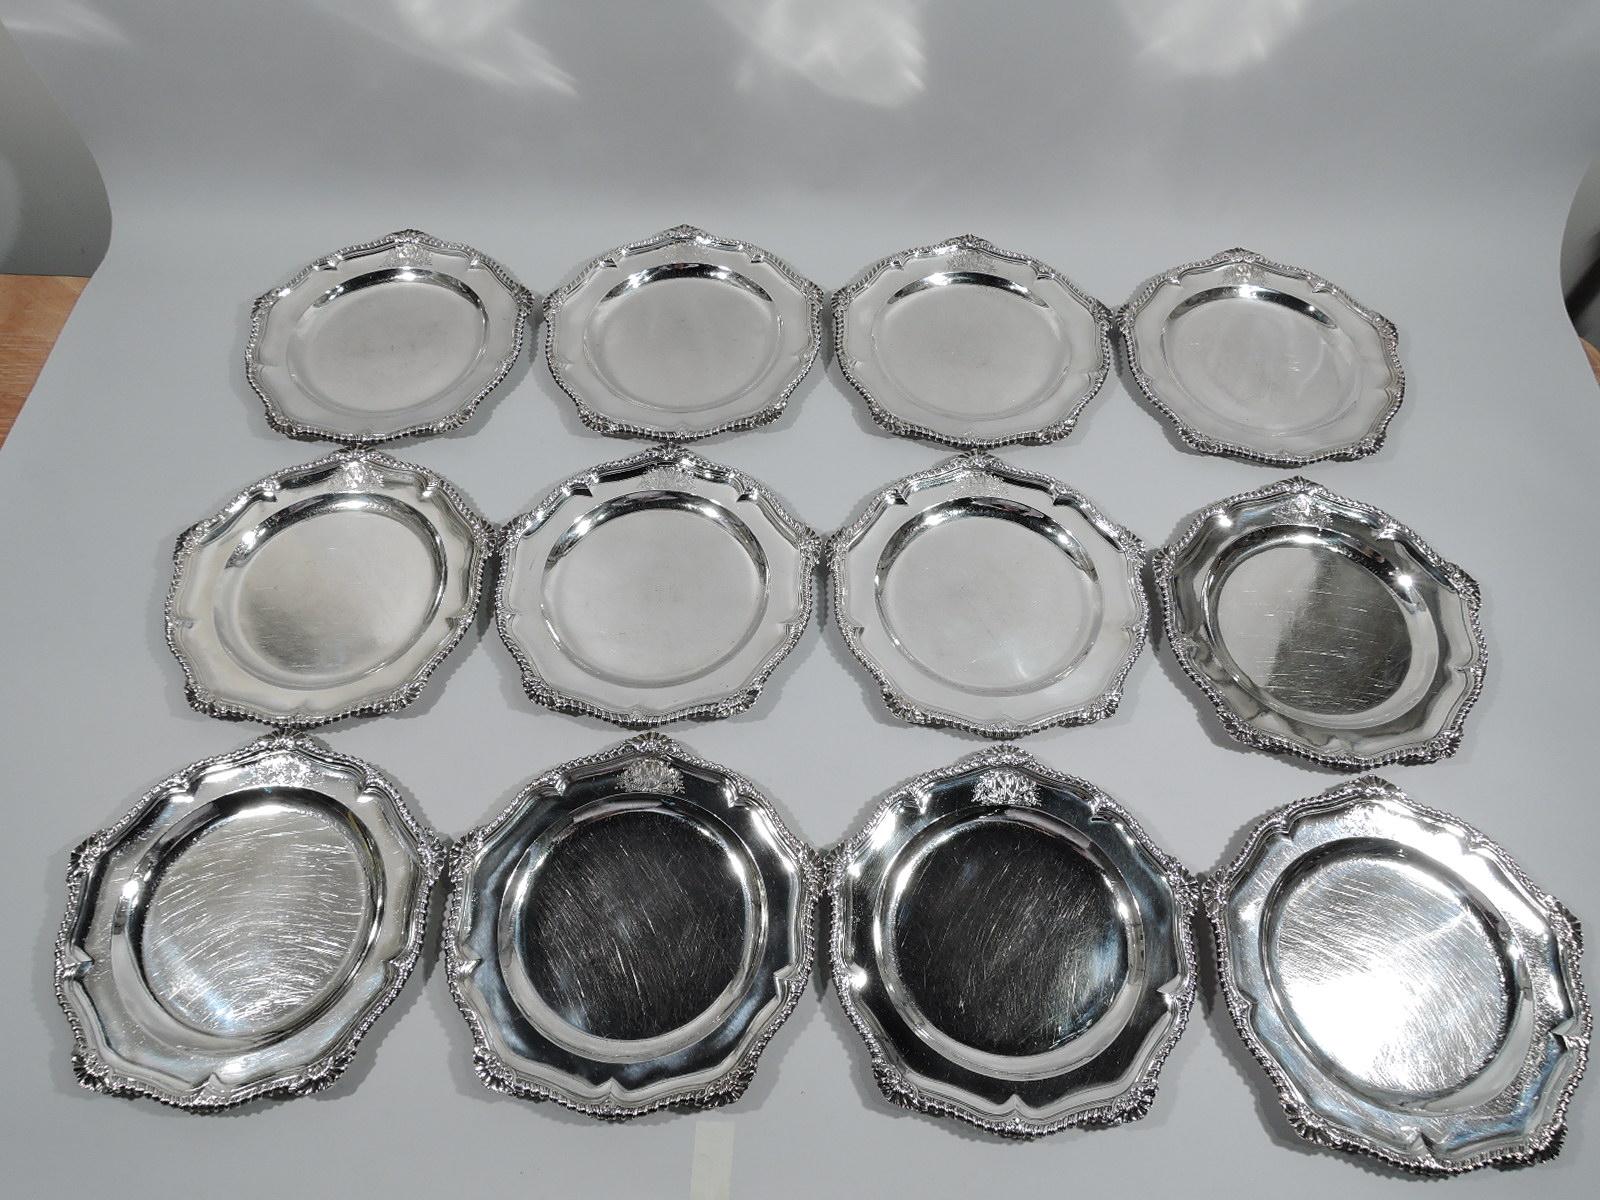 Mid-18th Century Set of 12 English Georgian Silver Dinner Plates by Archambo & Meure